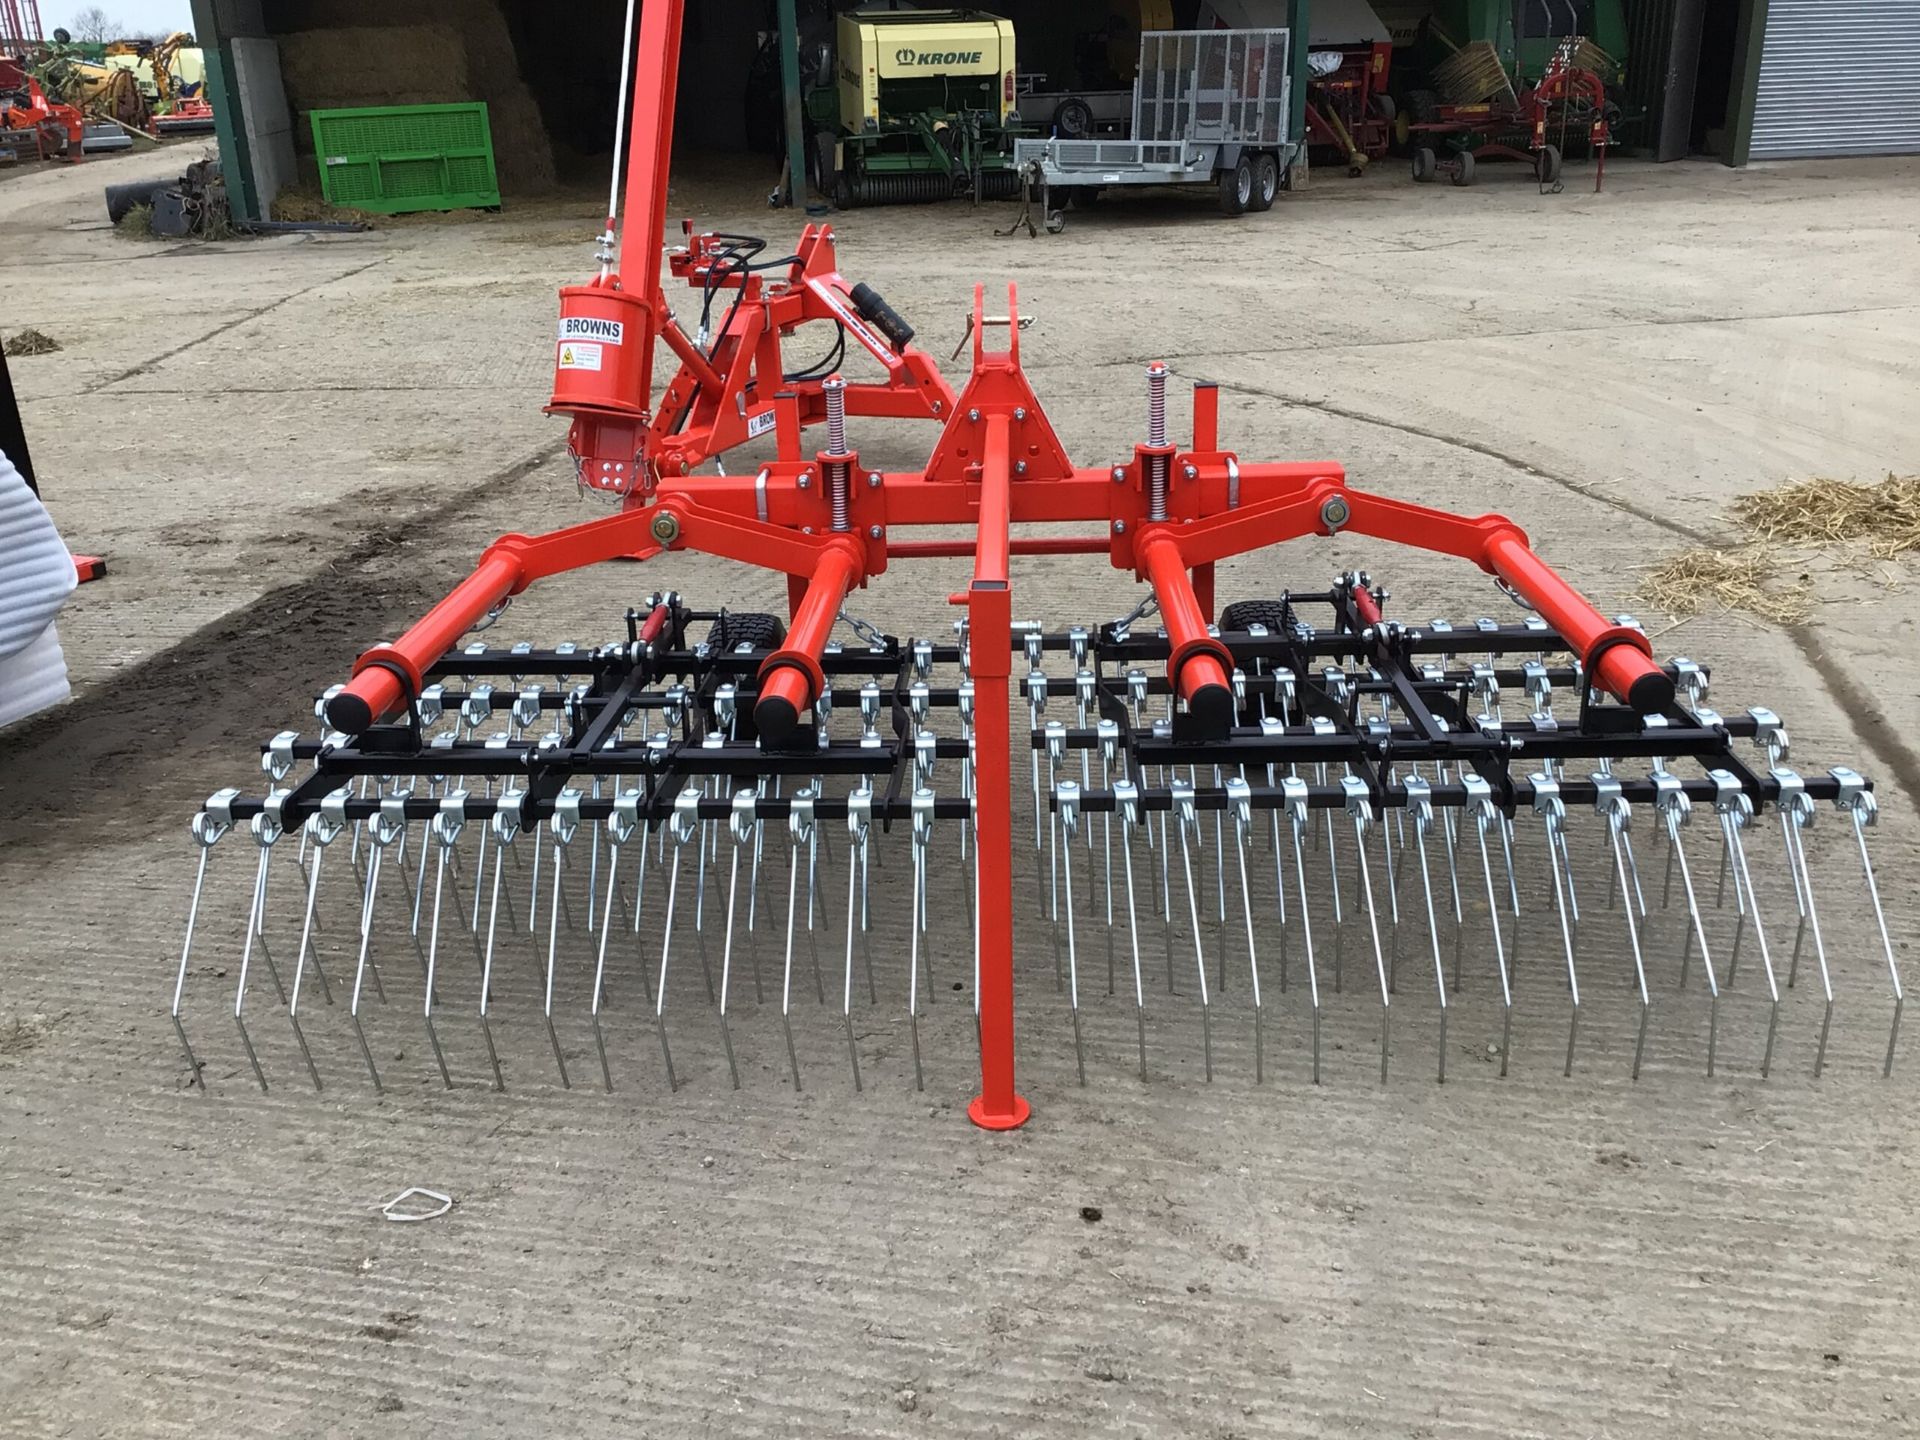 NEW BROWNS 3 METRE GRASS HARROW. 3 POINT LINKAGE - Image 8 of 8